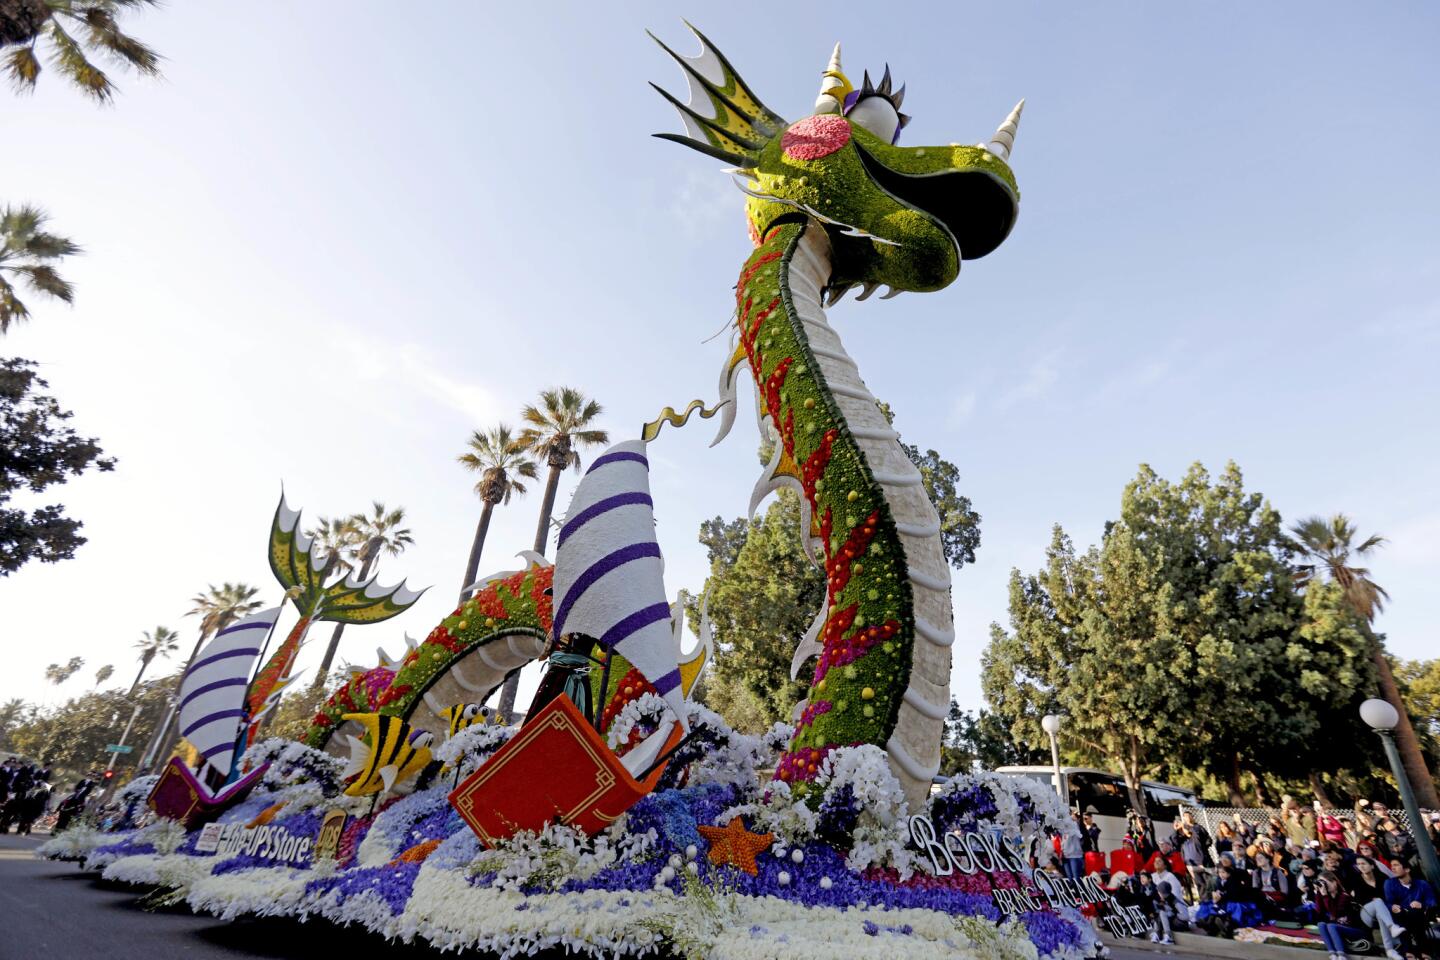 "Books Bring Dreams to Life" by The UPS Store, Inc winner of the Extraordinaire Trophy for the most extraordinary float in the 129th Rose Parade in Pasadena.